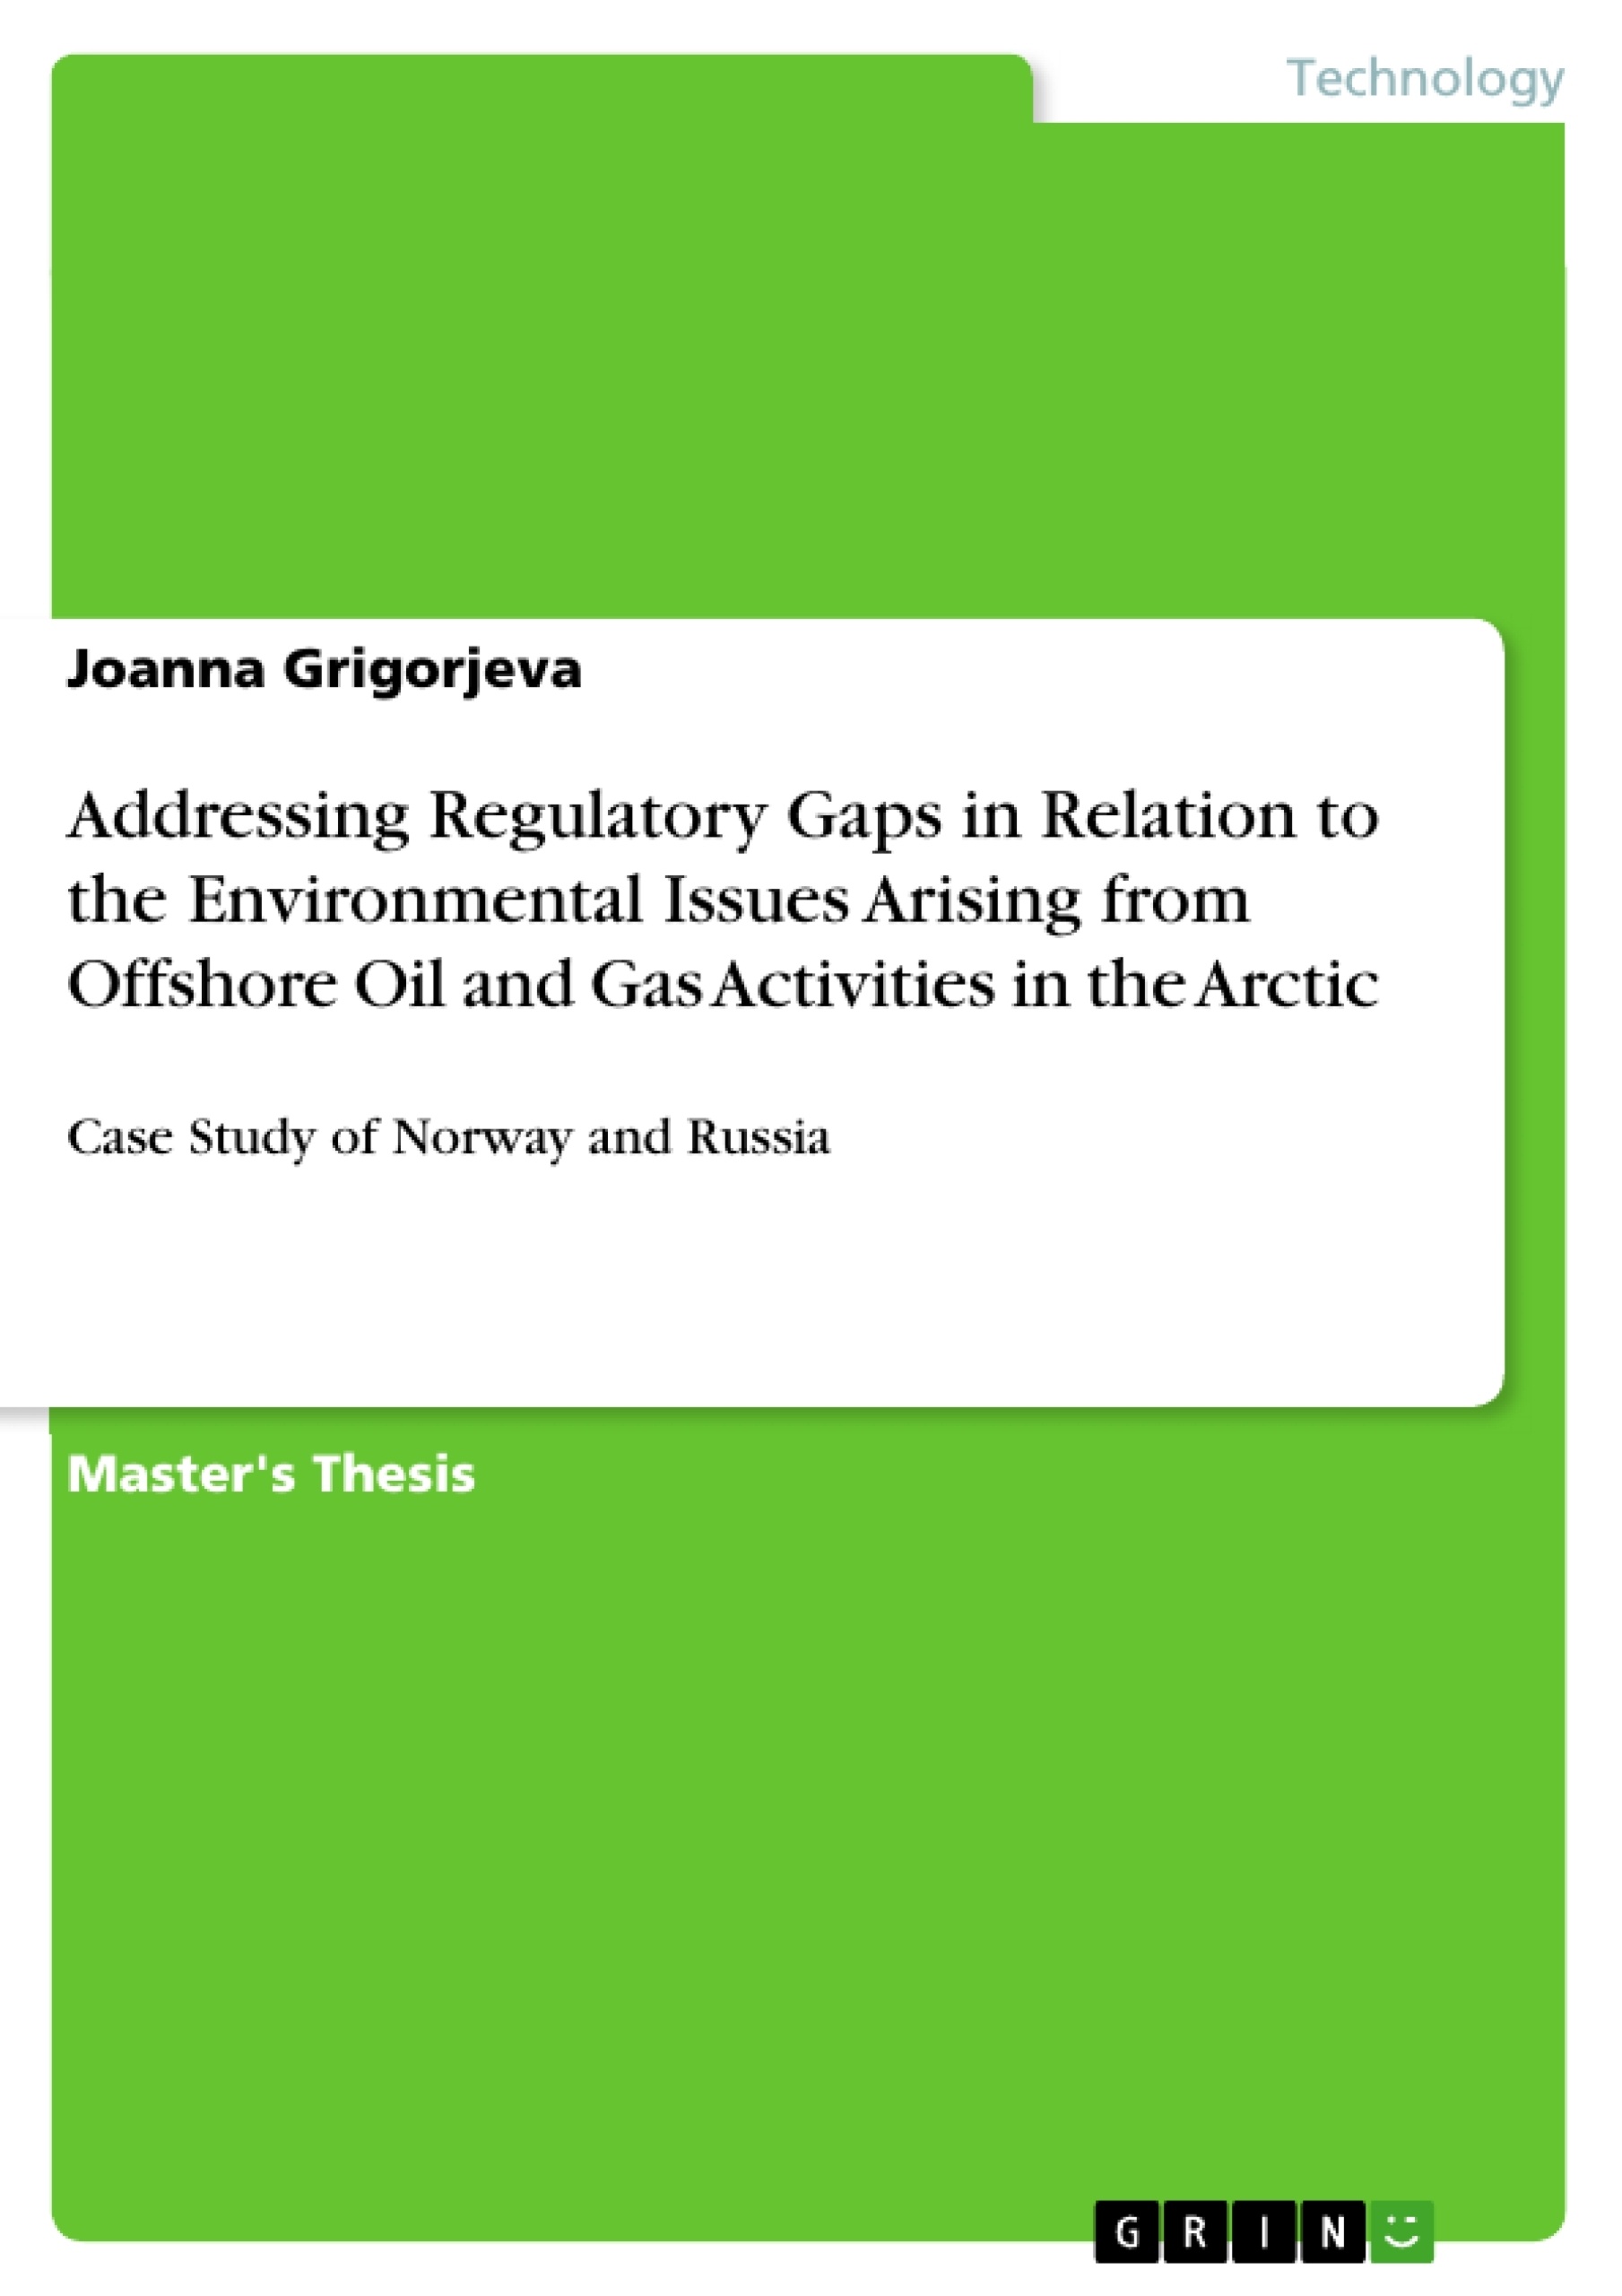 Titre: Addressing Regulatory Gaps in Relation to the Environmental Issues Arising from Offshore Oil and Gas Activities in the Arctic